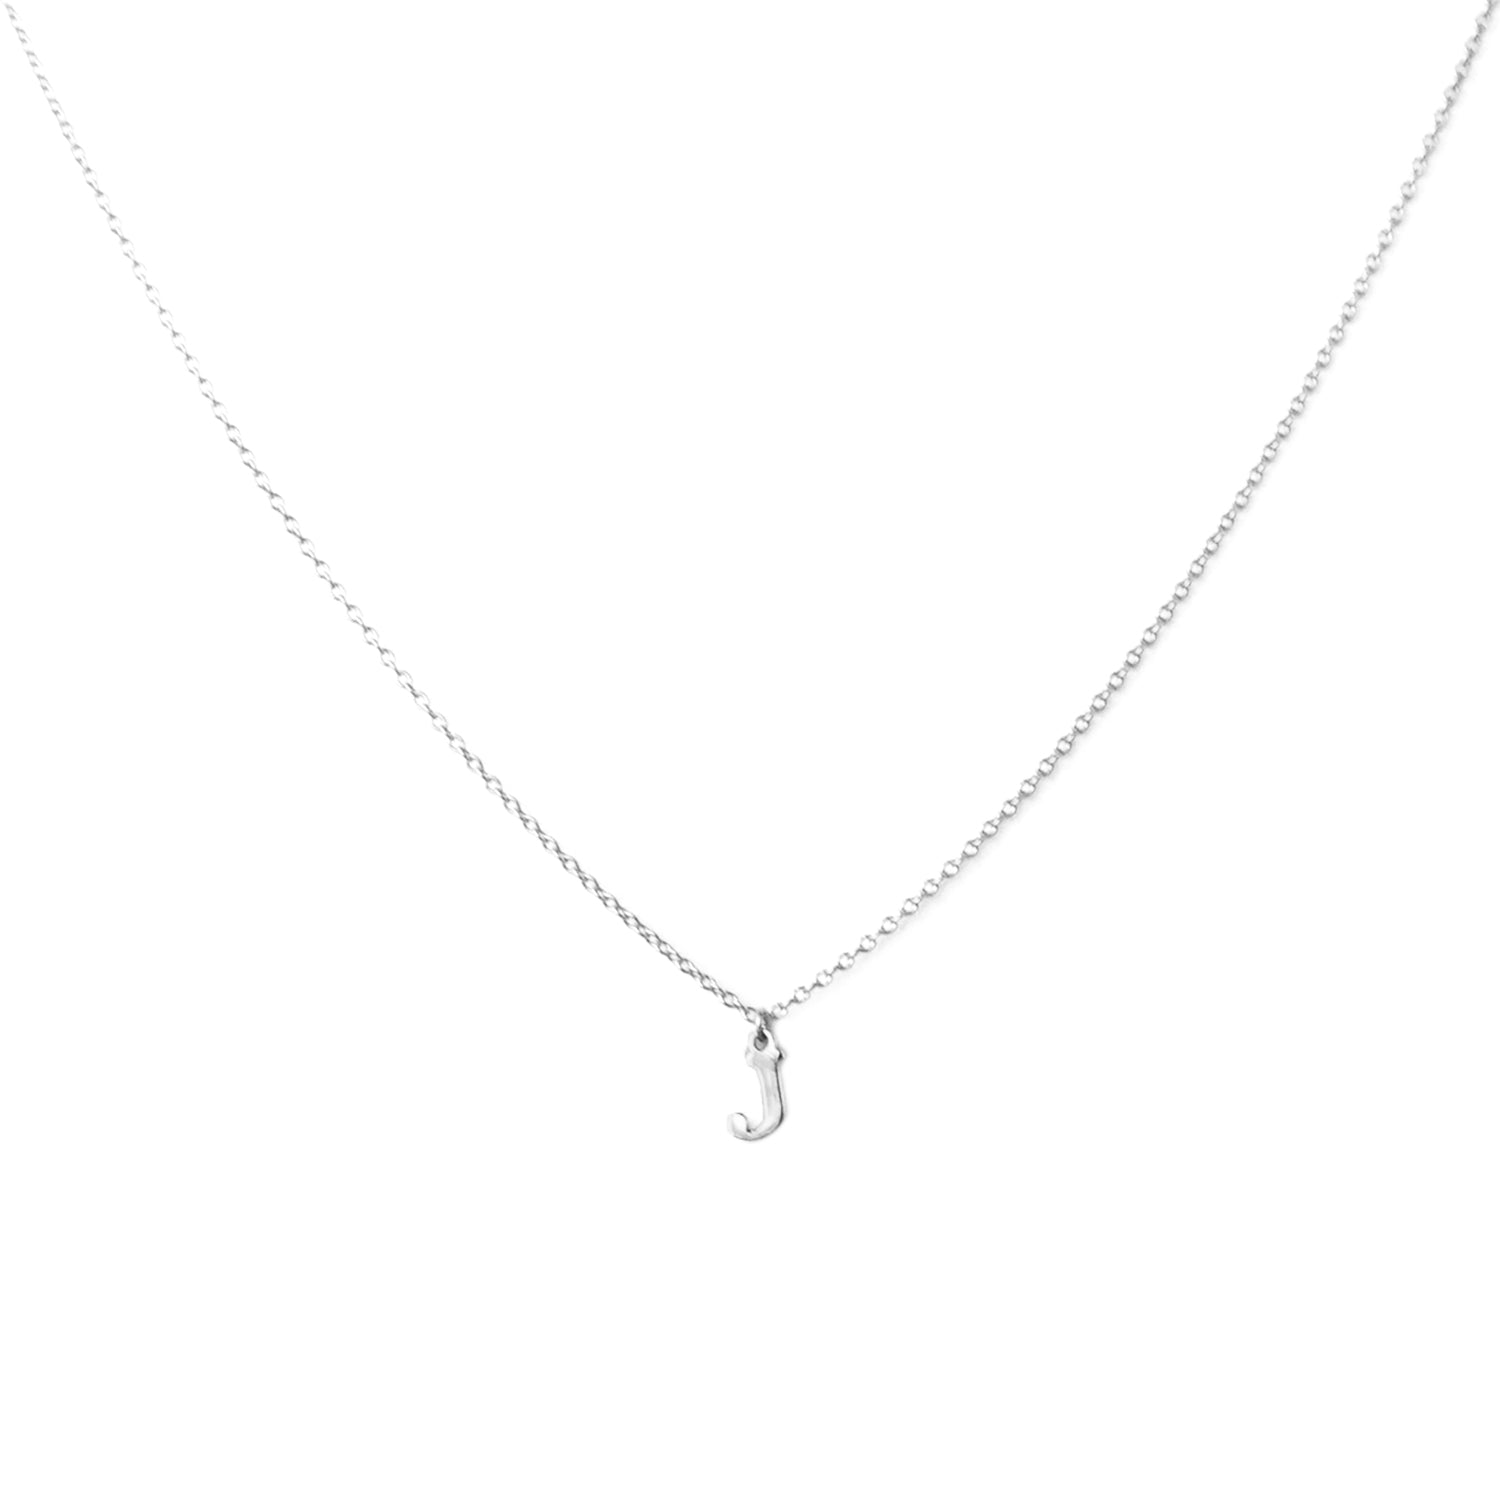 sterling silver block letter initial necklace